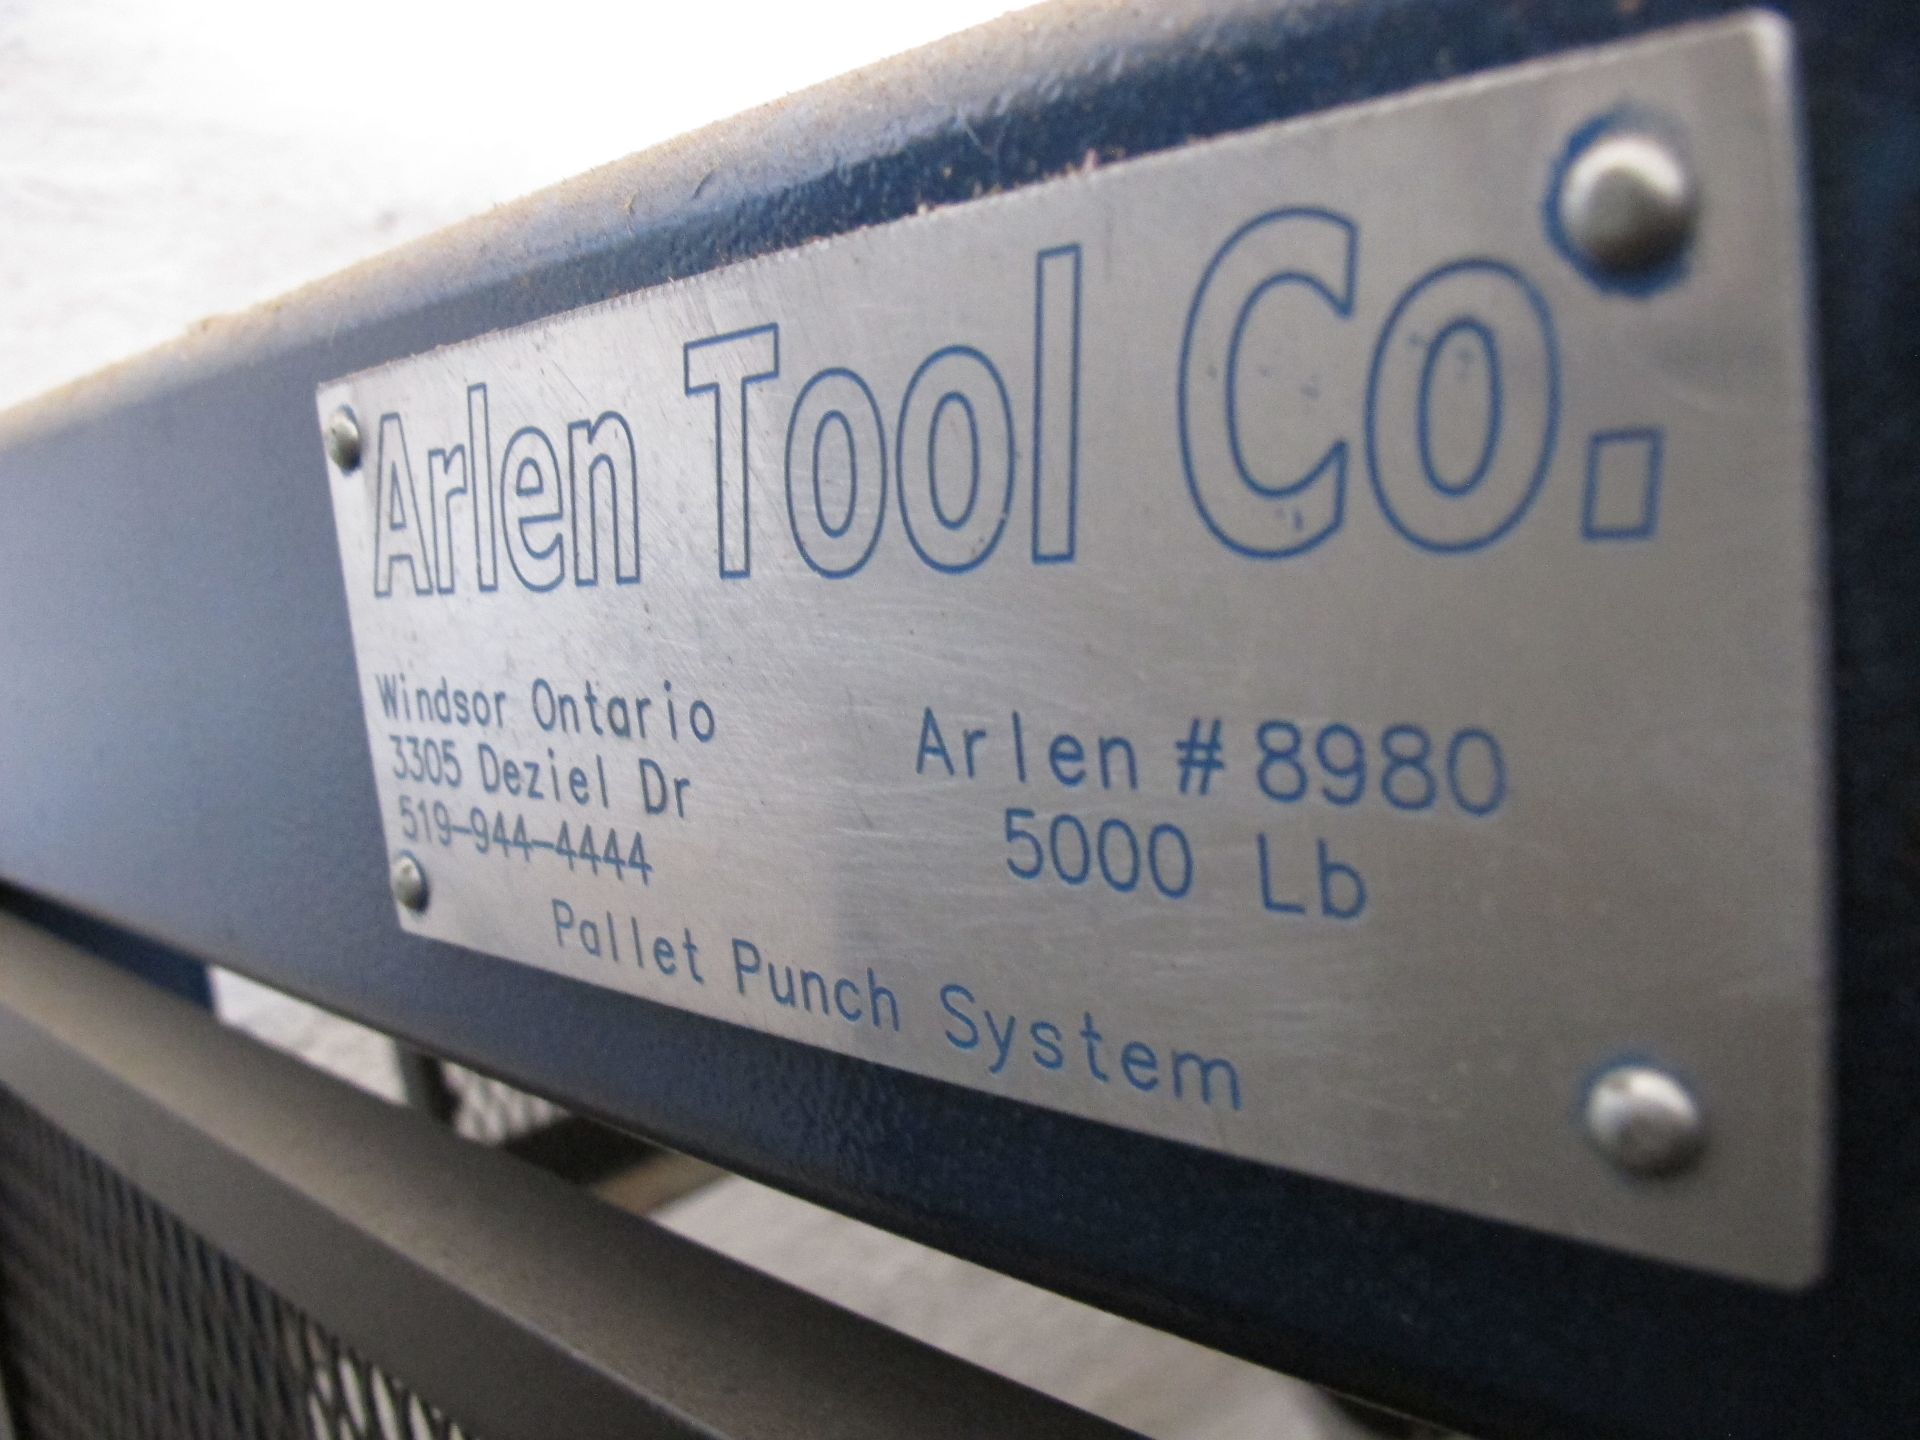 ARLEN TOOL CO. PALLET PUNCH SYSTEM WITH ELECTRICAL CONTROLS, REXROTH CONVEYER, AUTOMATIC PALLET LOAD - Image 7 of 15